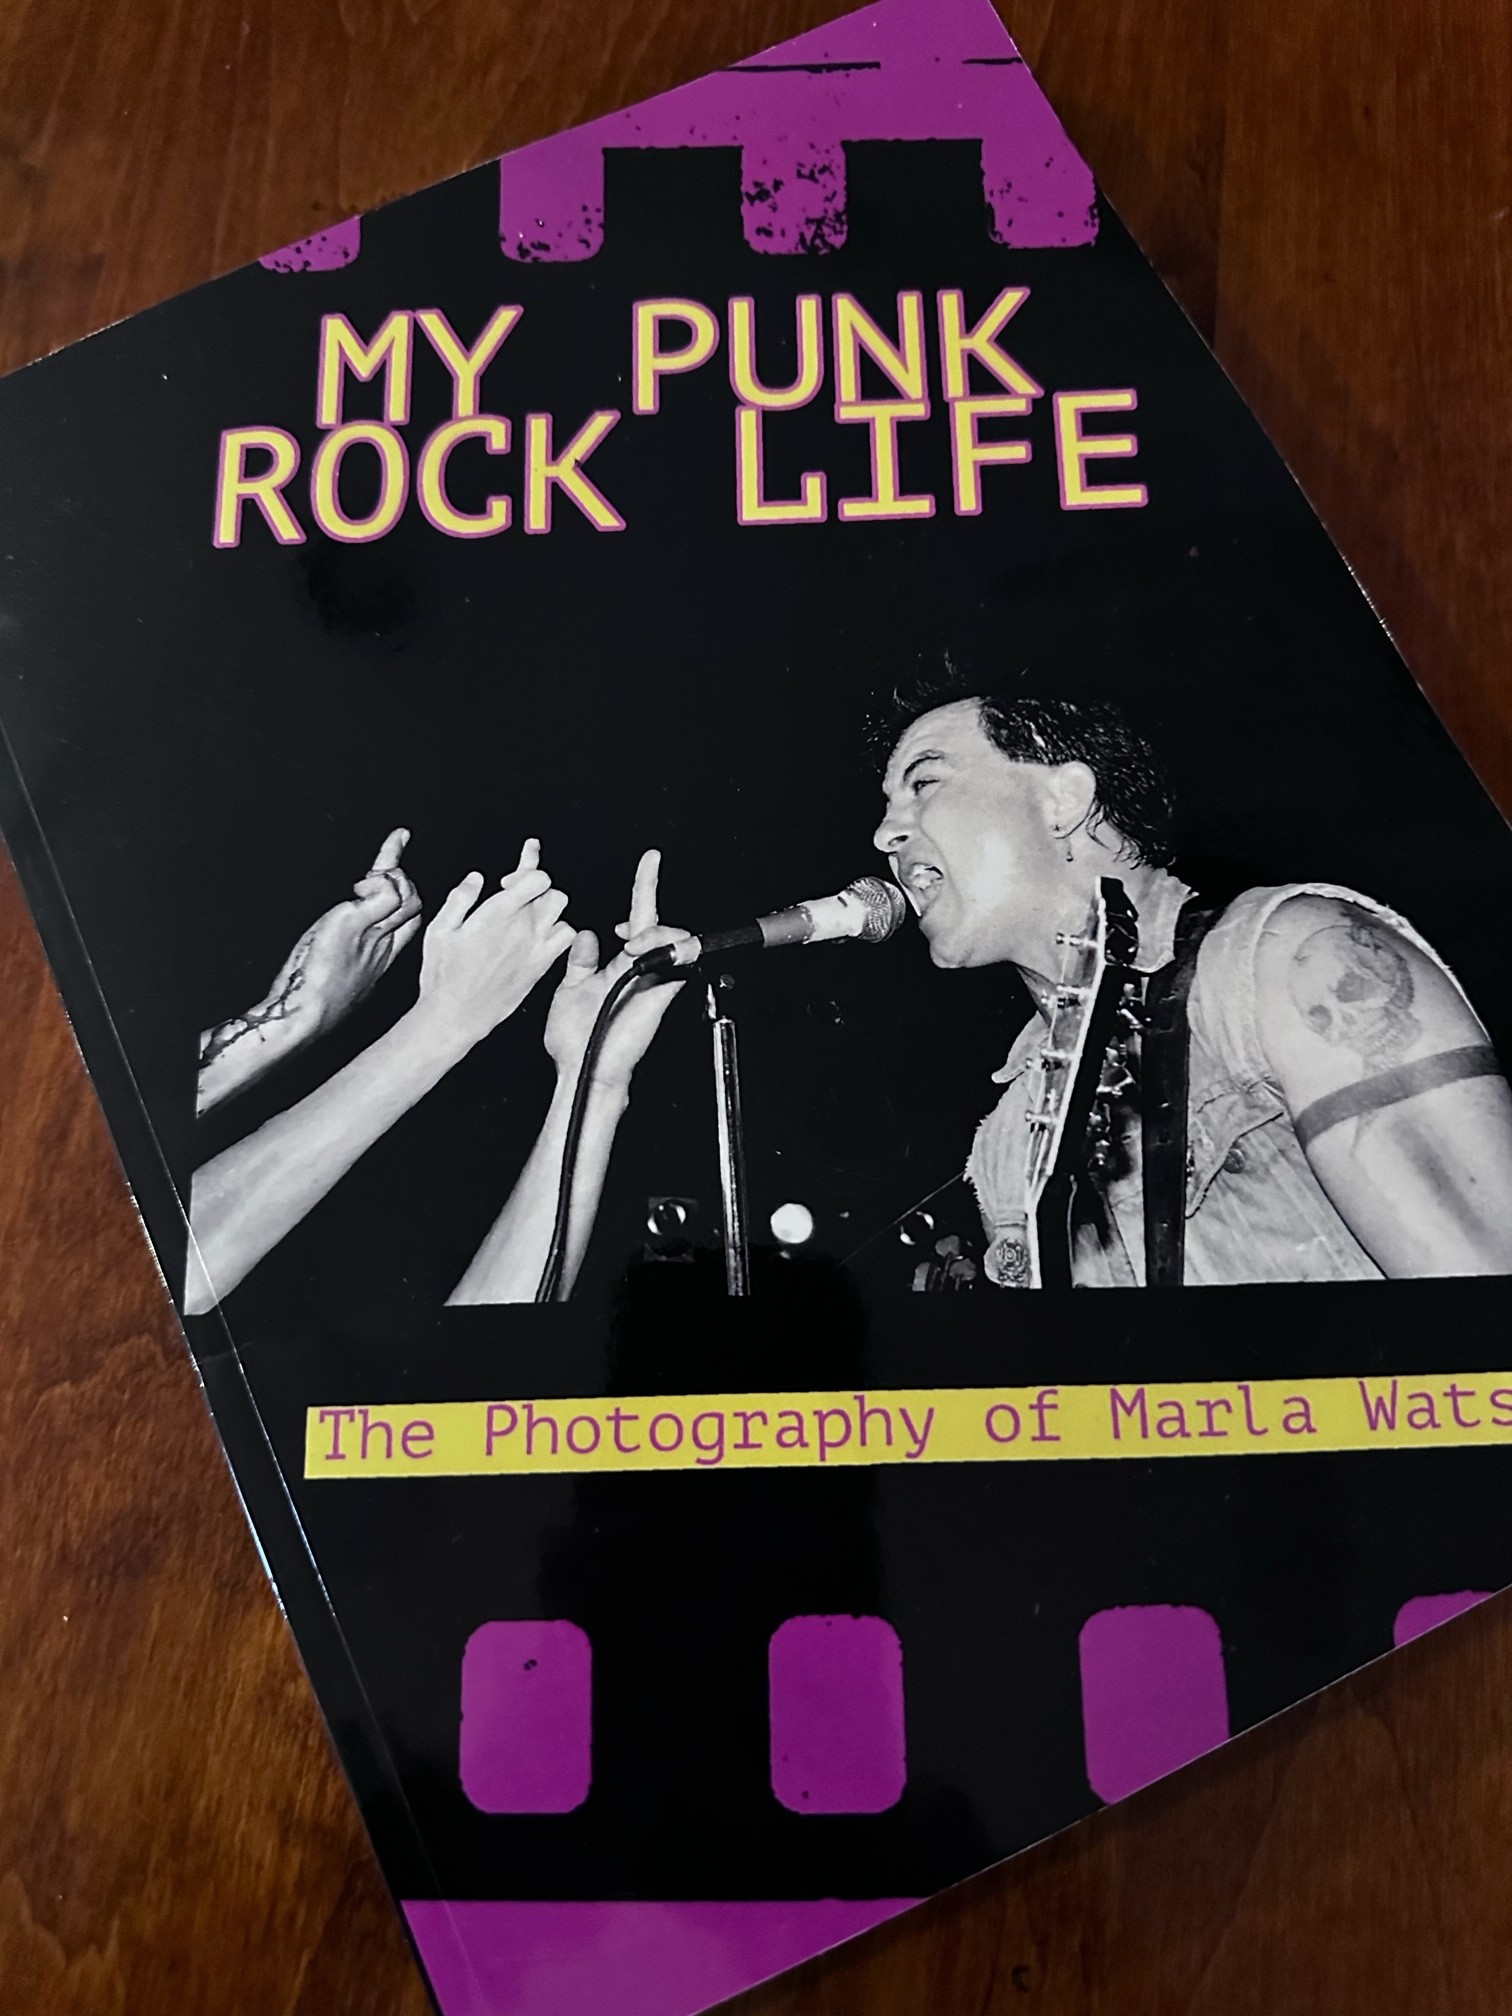 Lessons from My Punk Rock Life: How being a punk rocker made me a